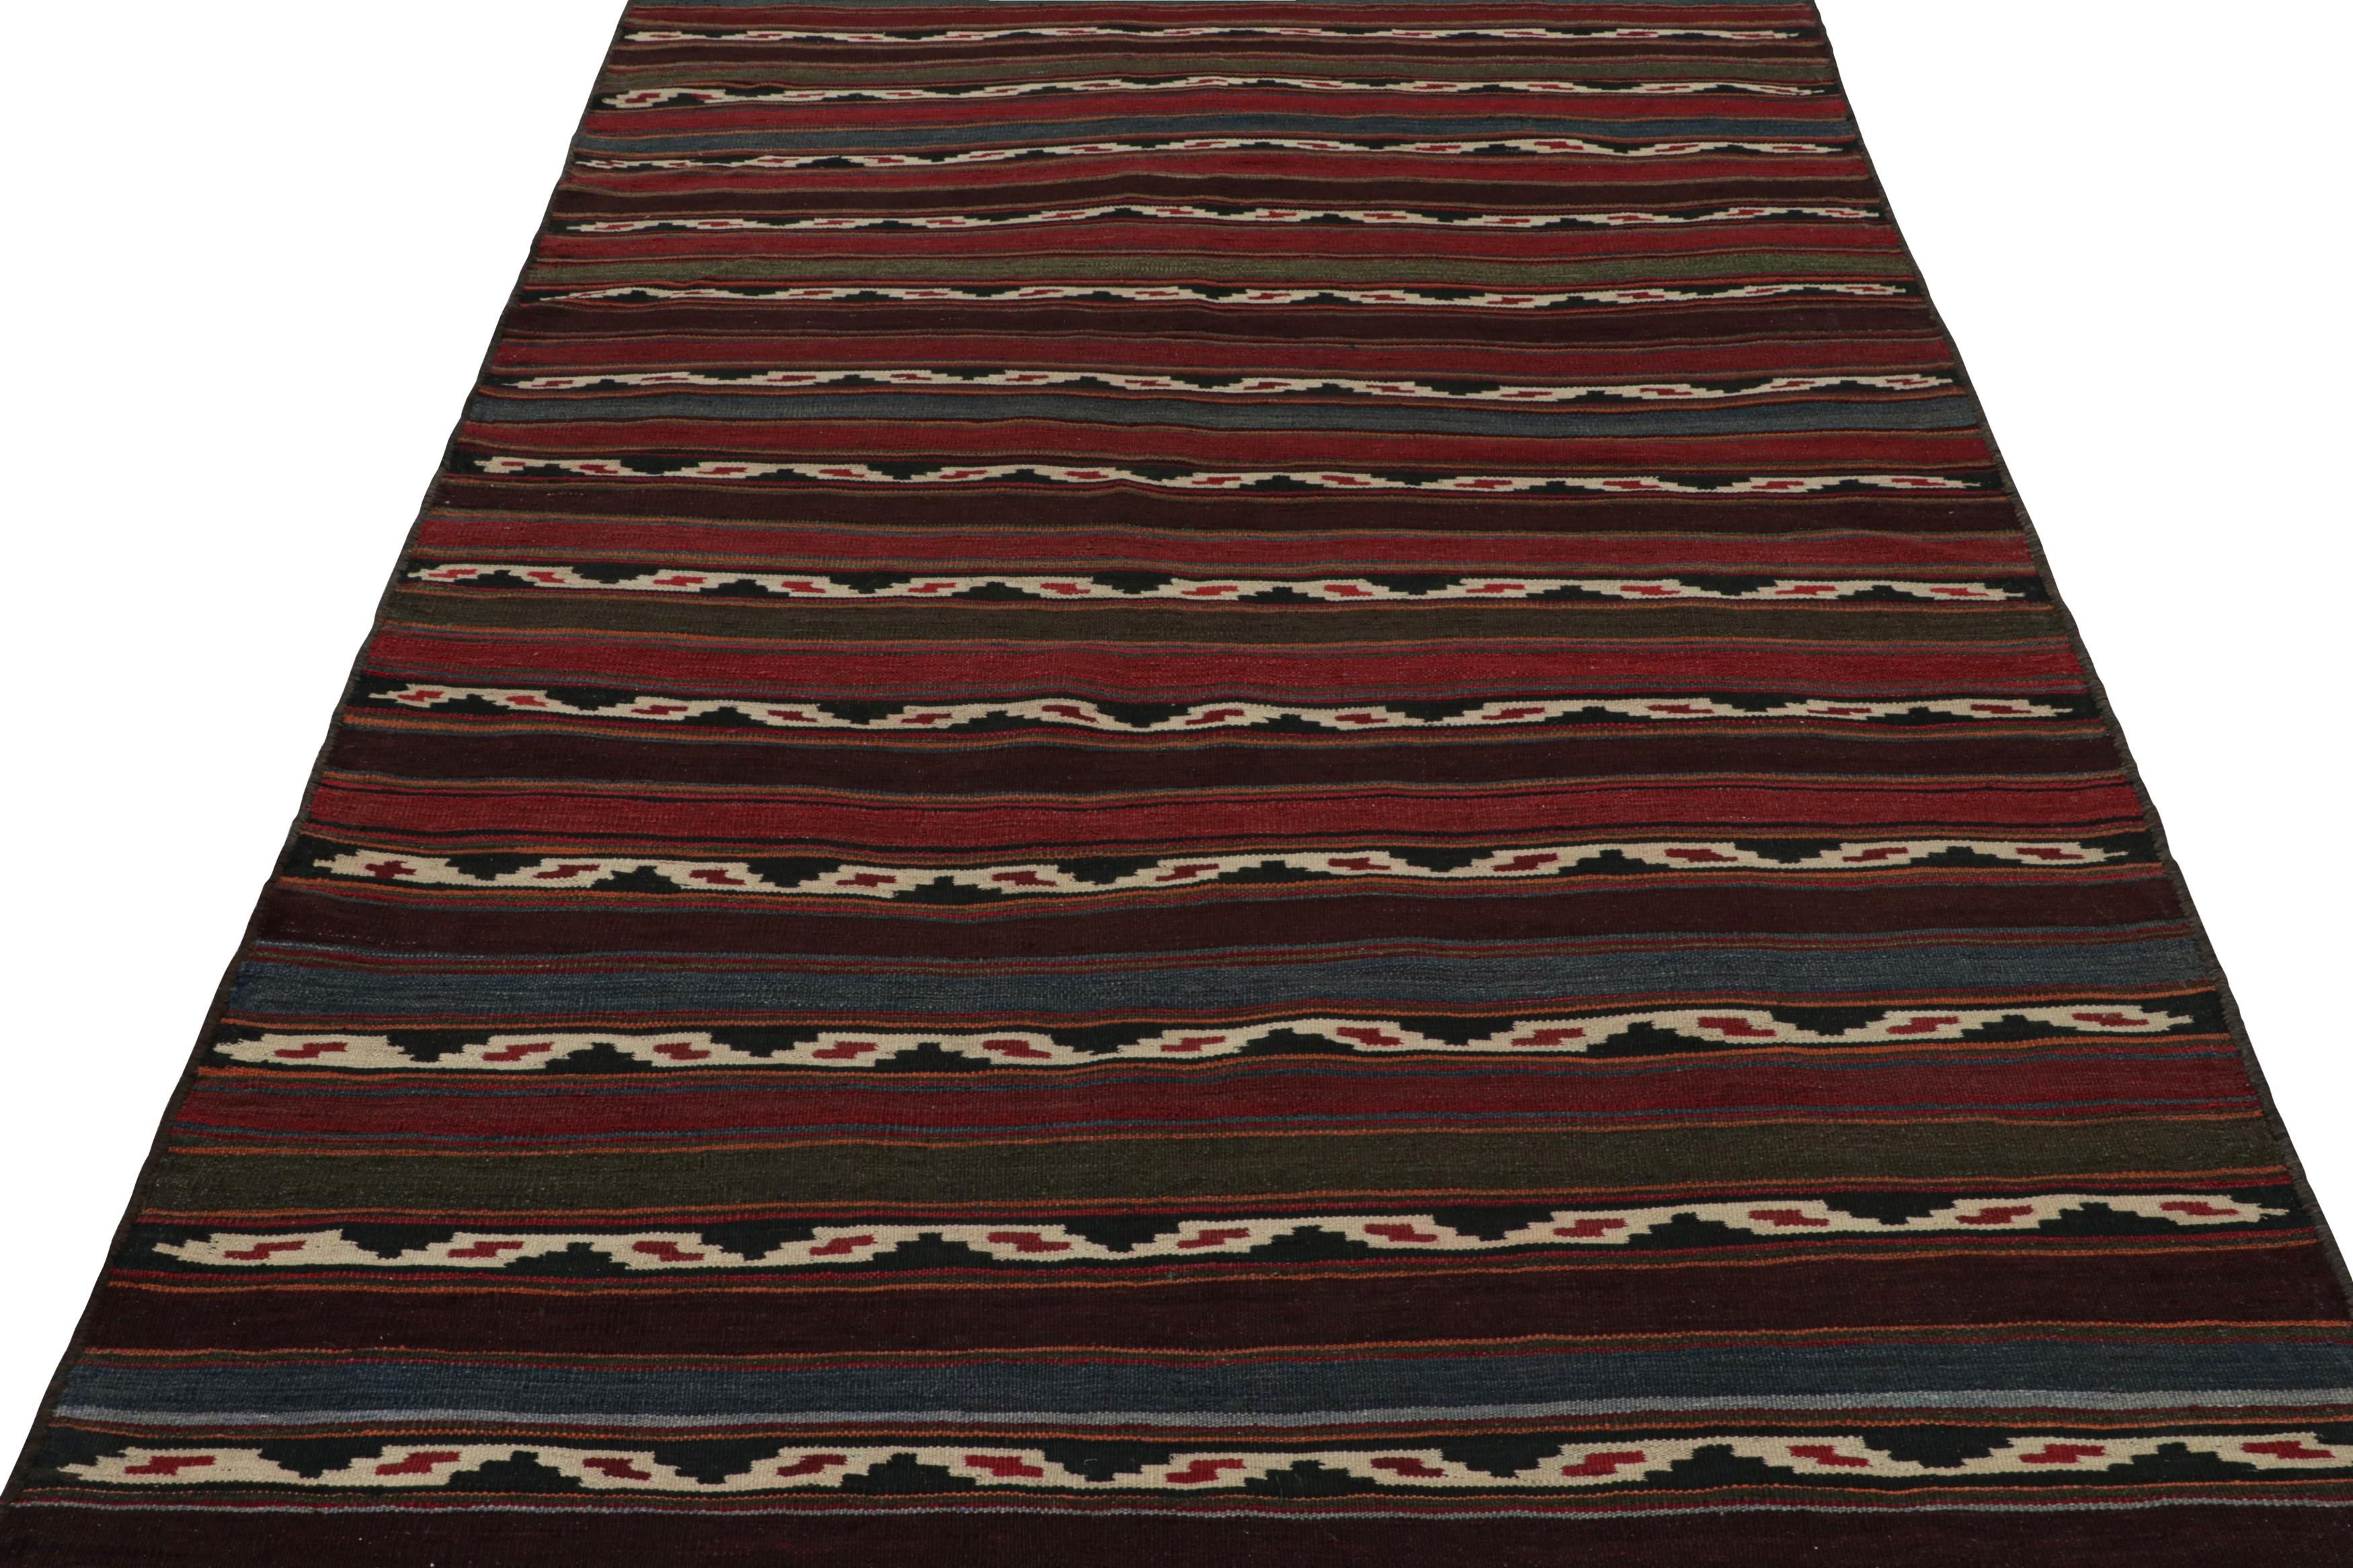 Tribal Vintage Afghani tribal Kilim Rug, with Red and Blue Stripes, from Rug & Kilim For Sale